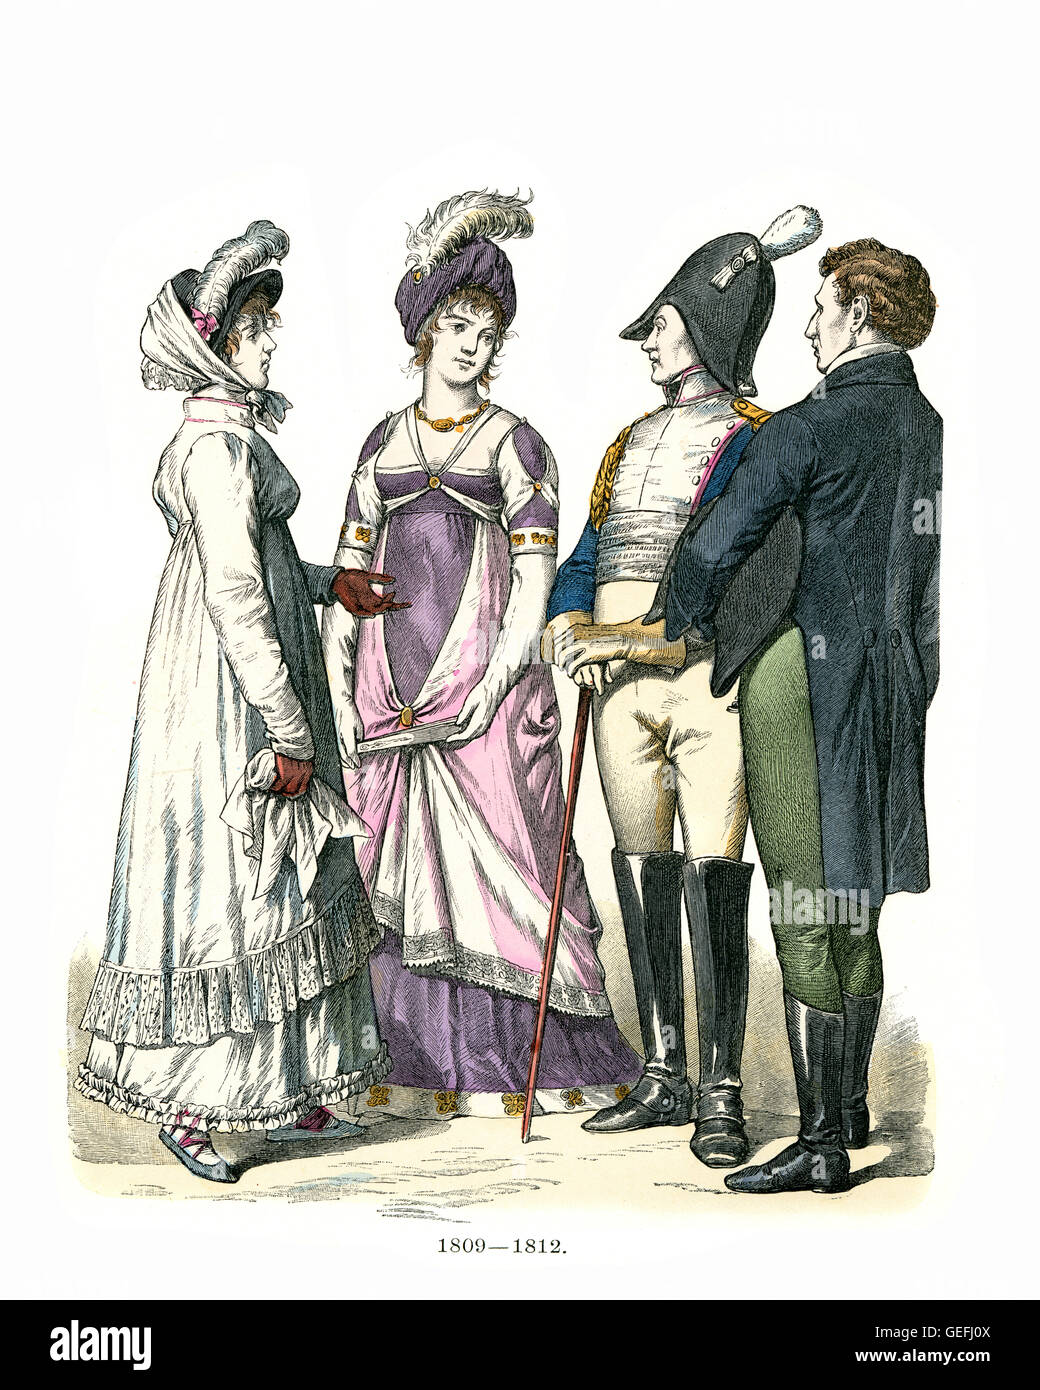 Men's and Women's fashions at the start of the 19th century Stock Photo